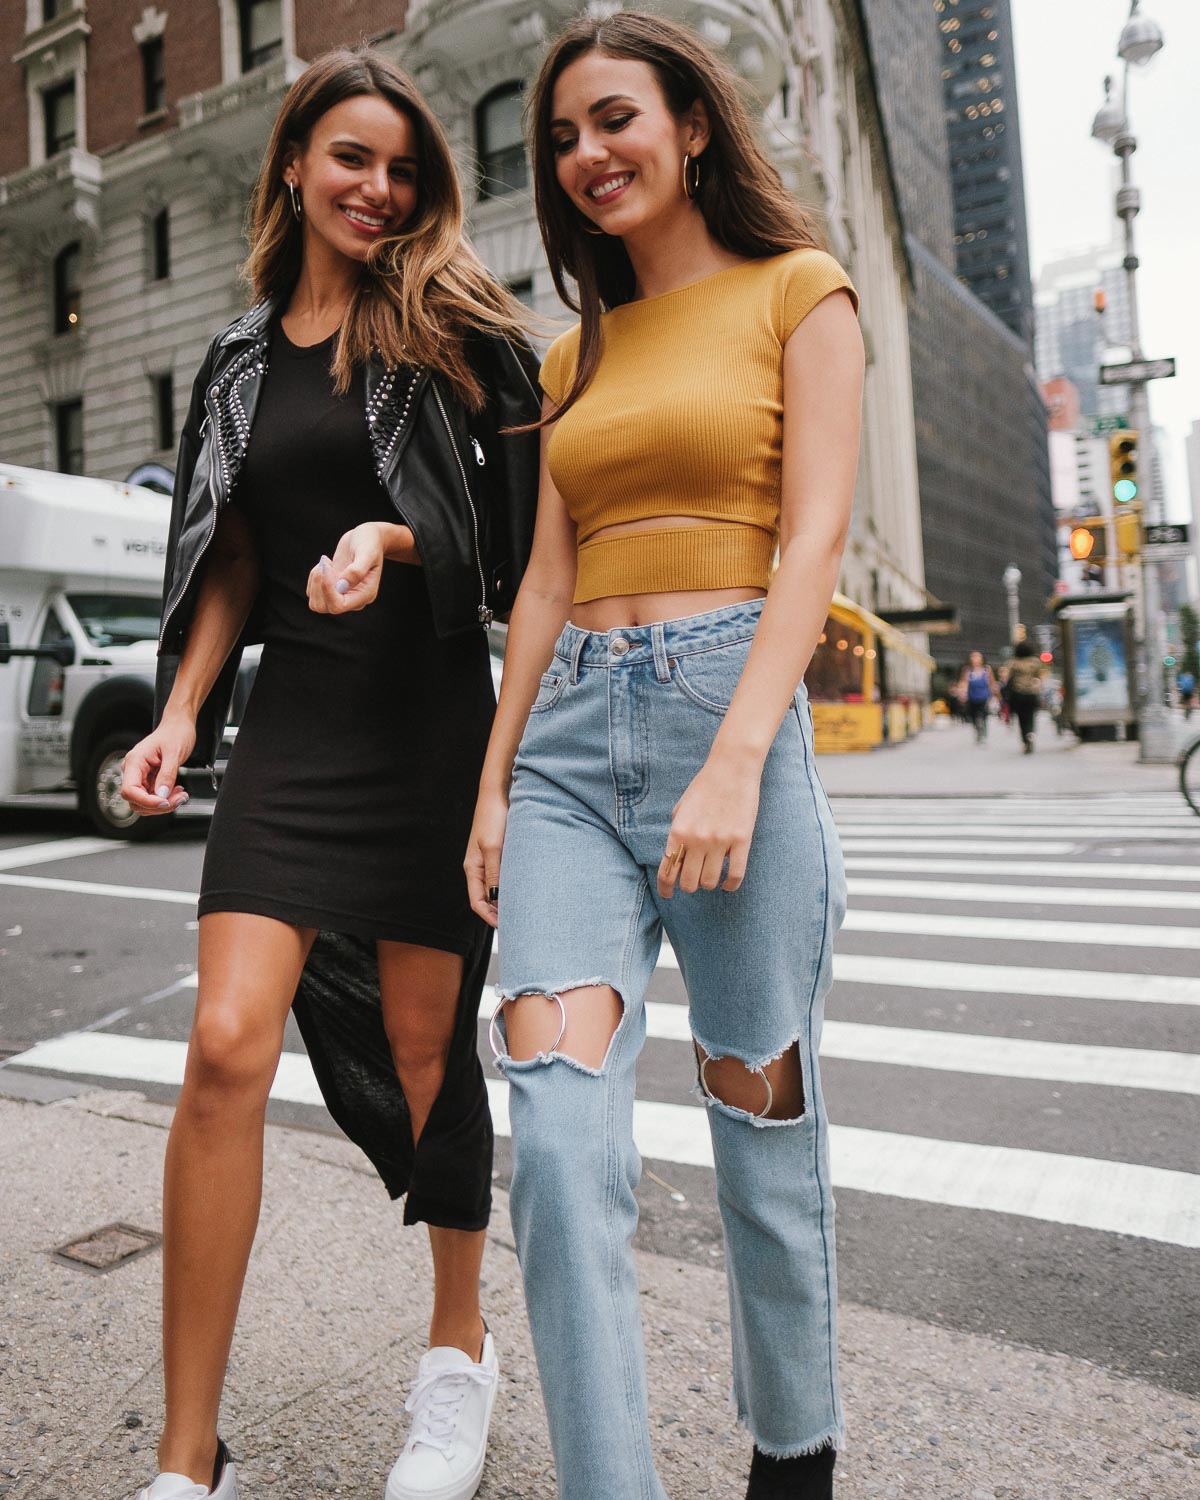 Victoria Justice and Madison Reed by Paul Mauer Photoshoot (September 2018)